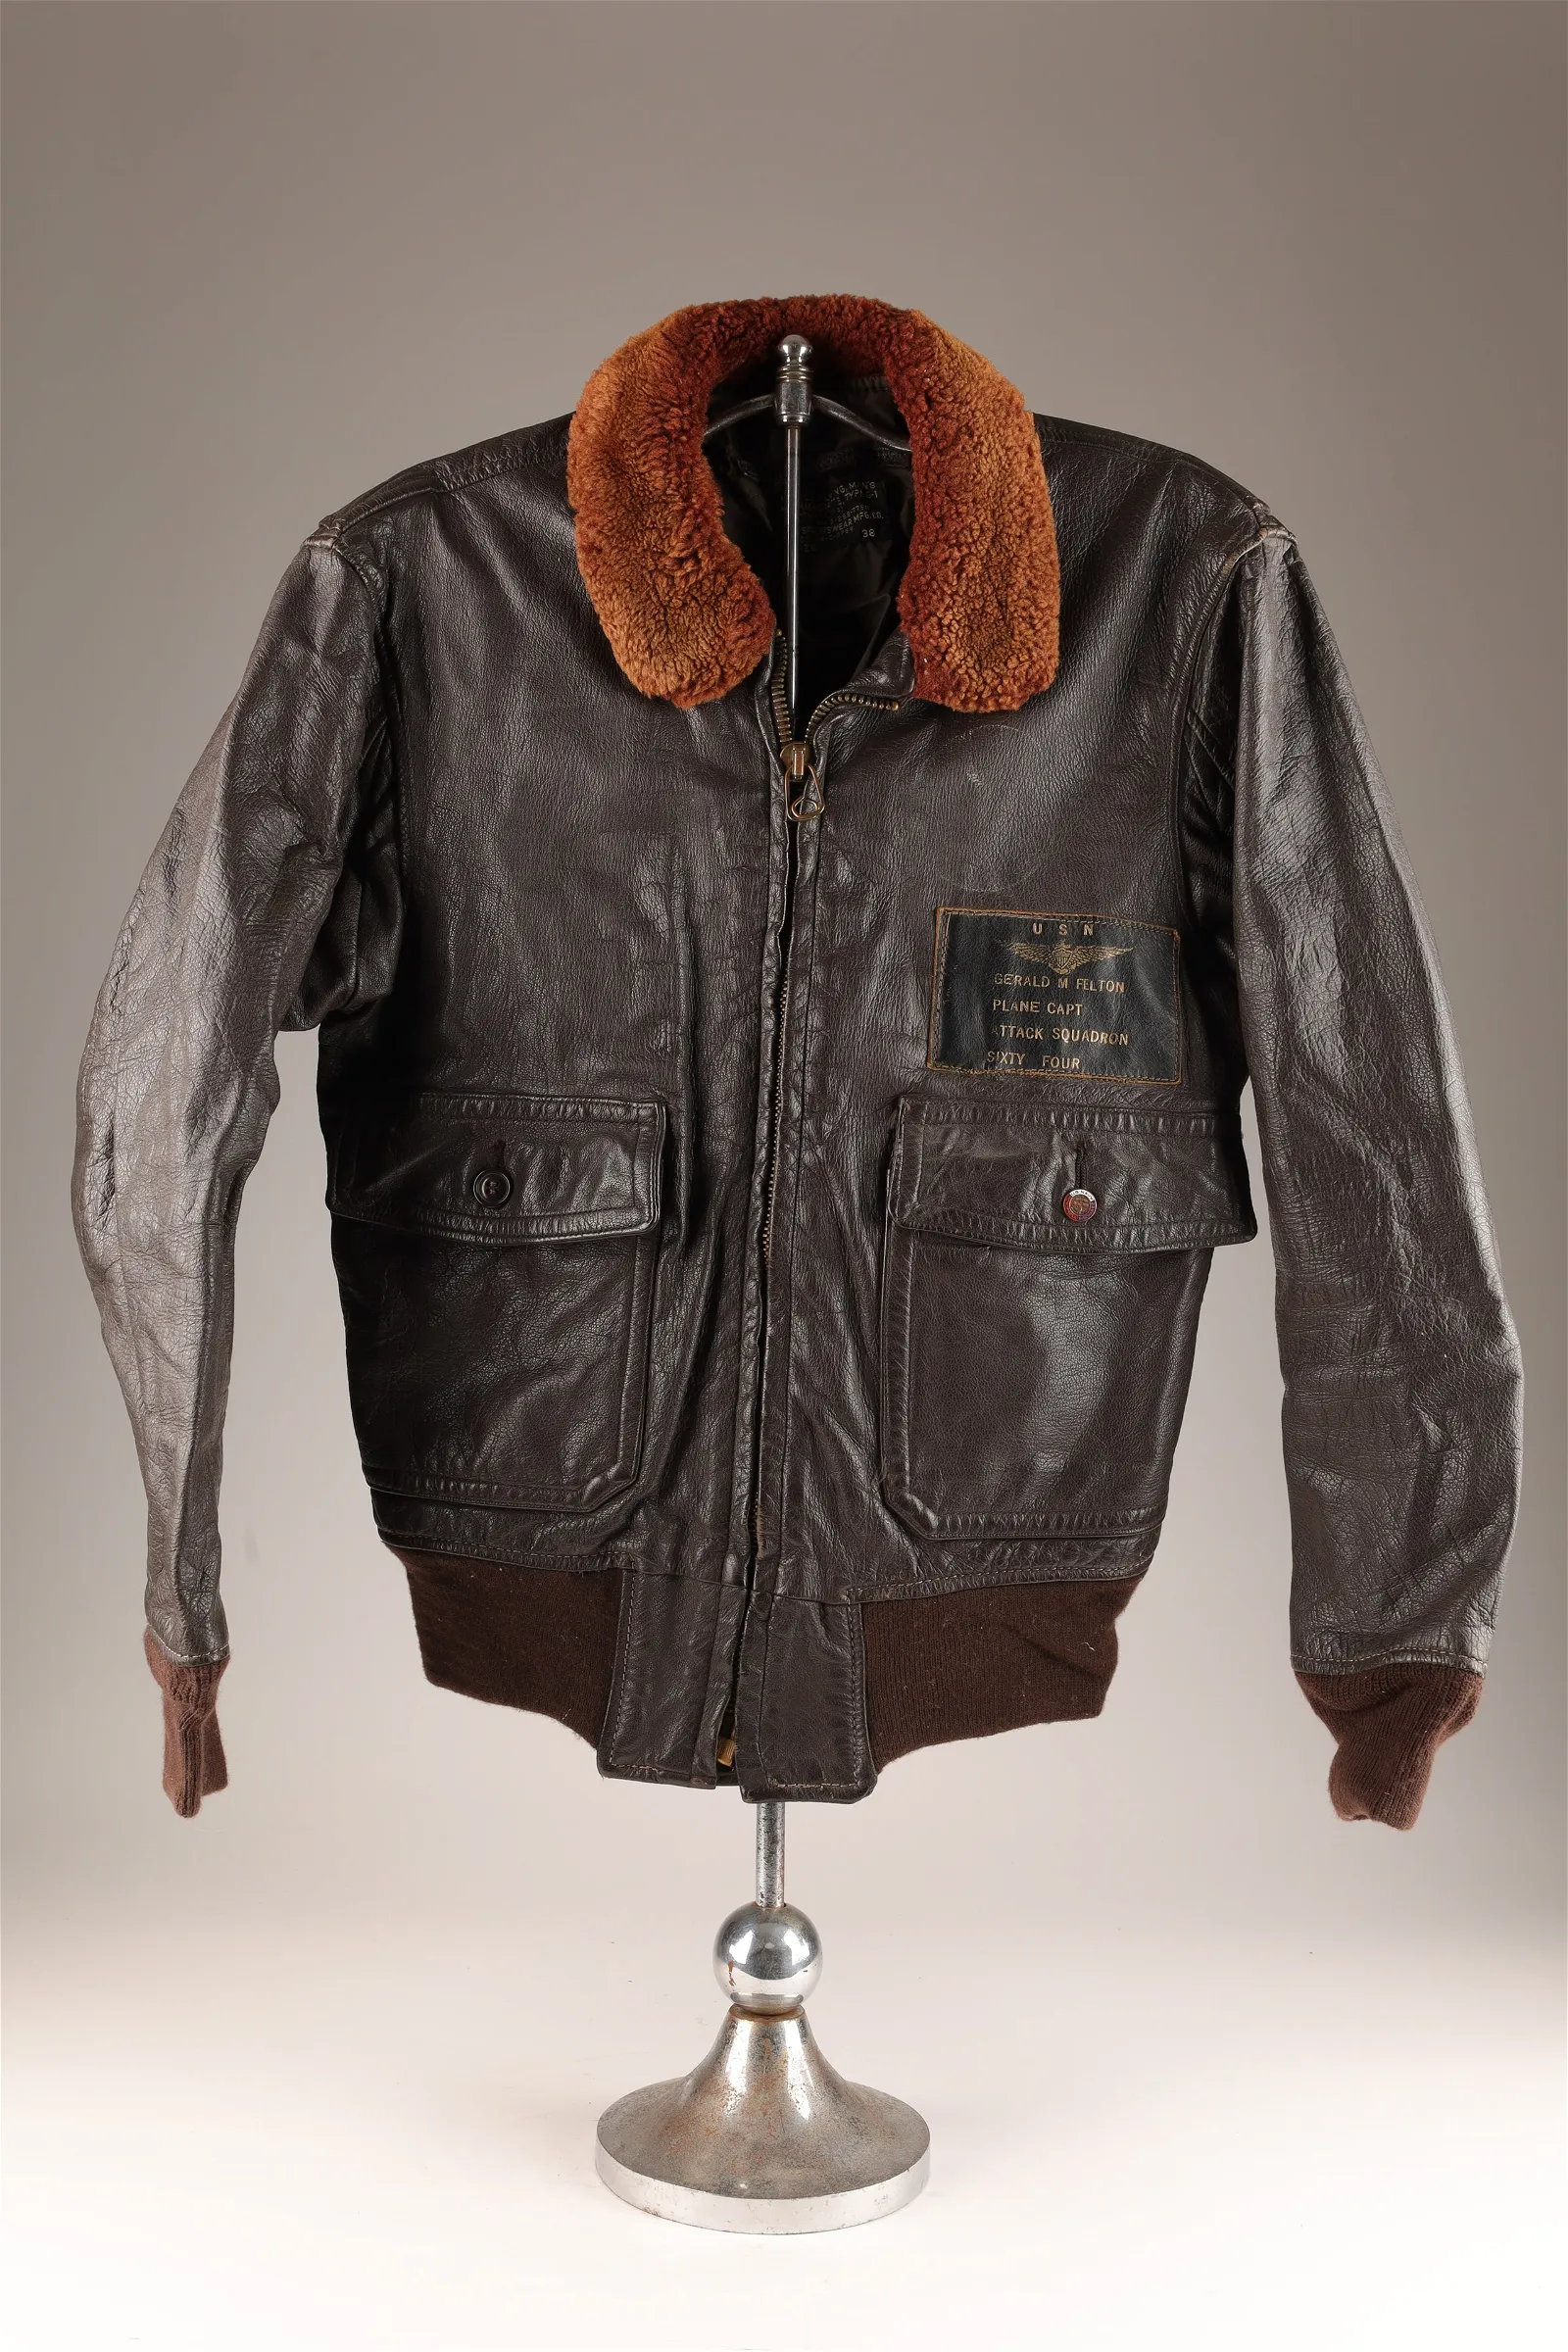 Vintage aviator jackets, silver, fine art and antiques mix at Kavanagh&#8217;s Dec. 16 auction